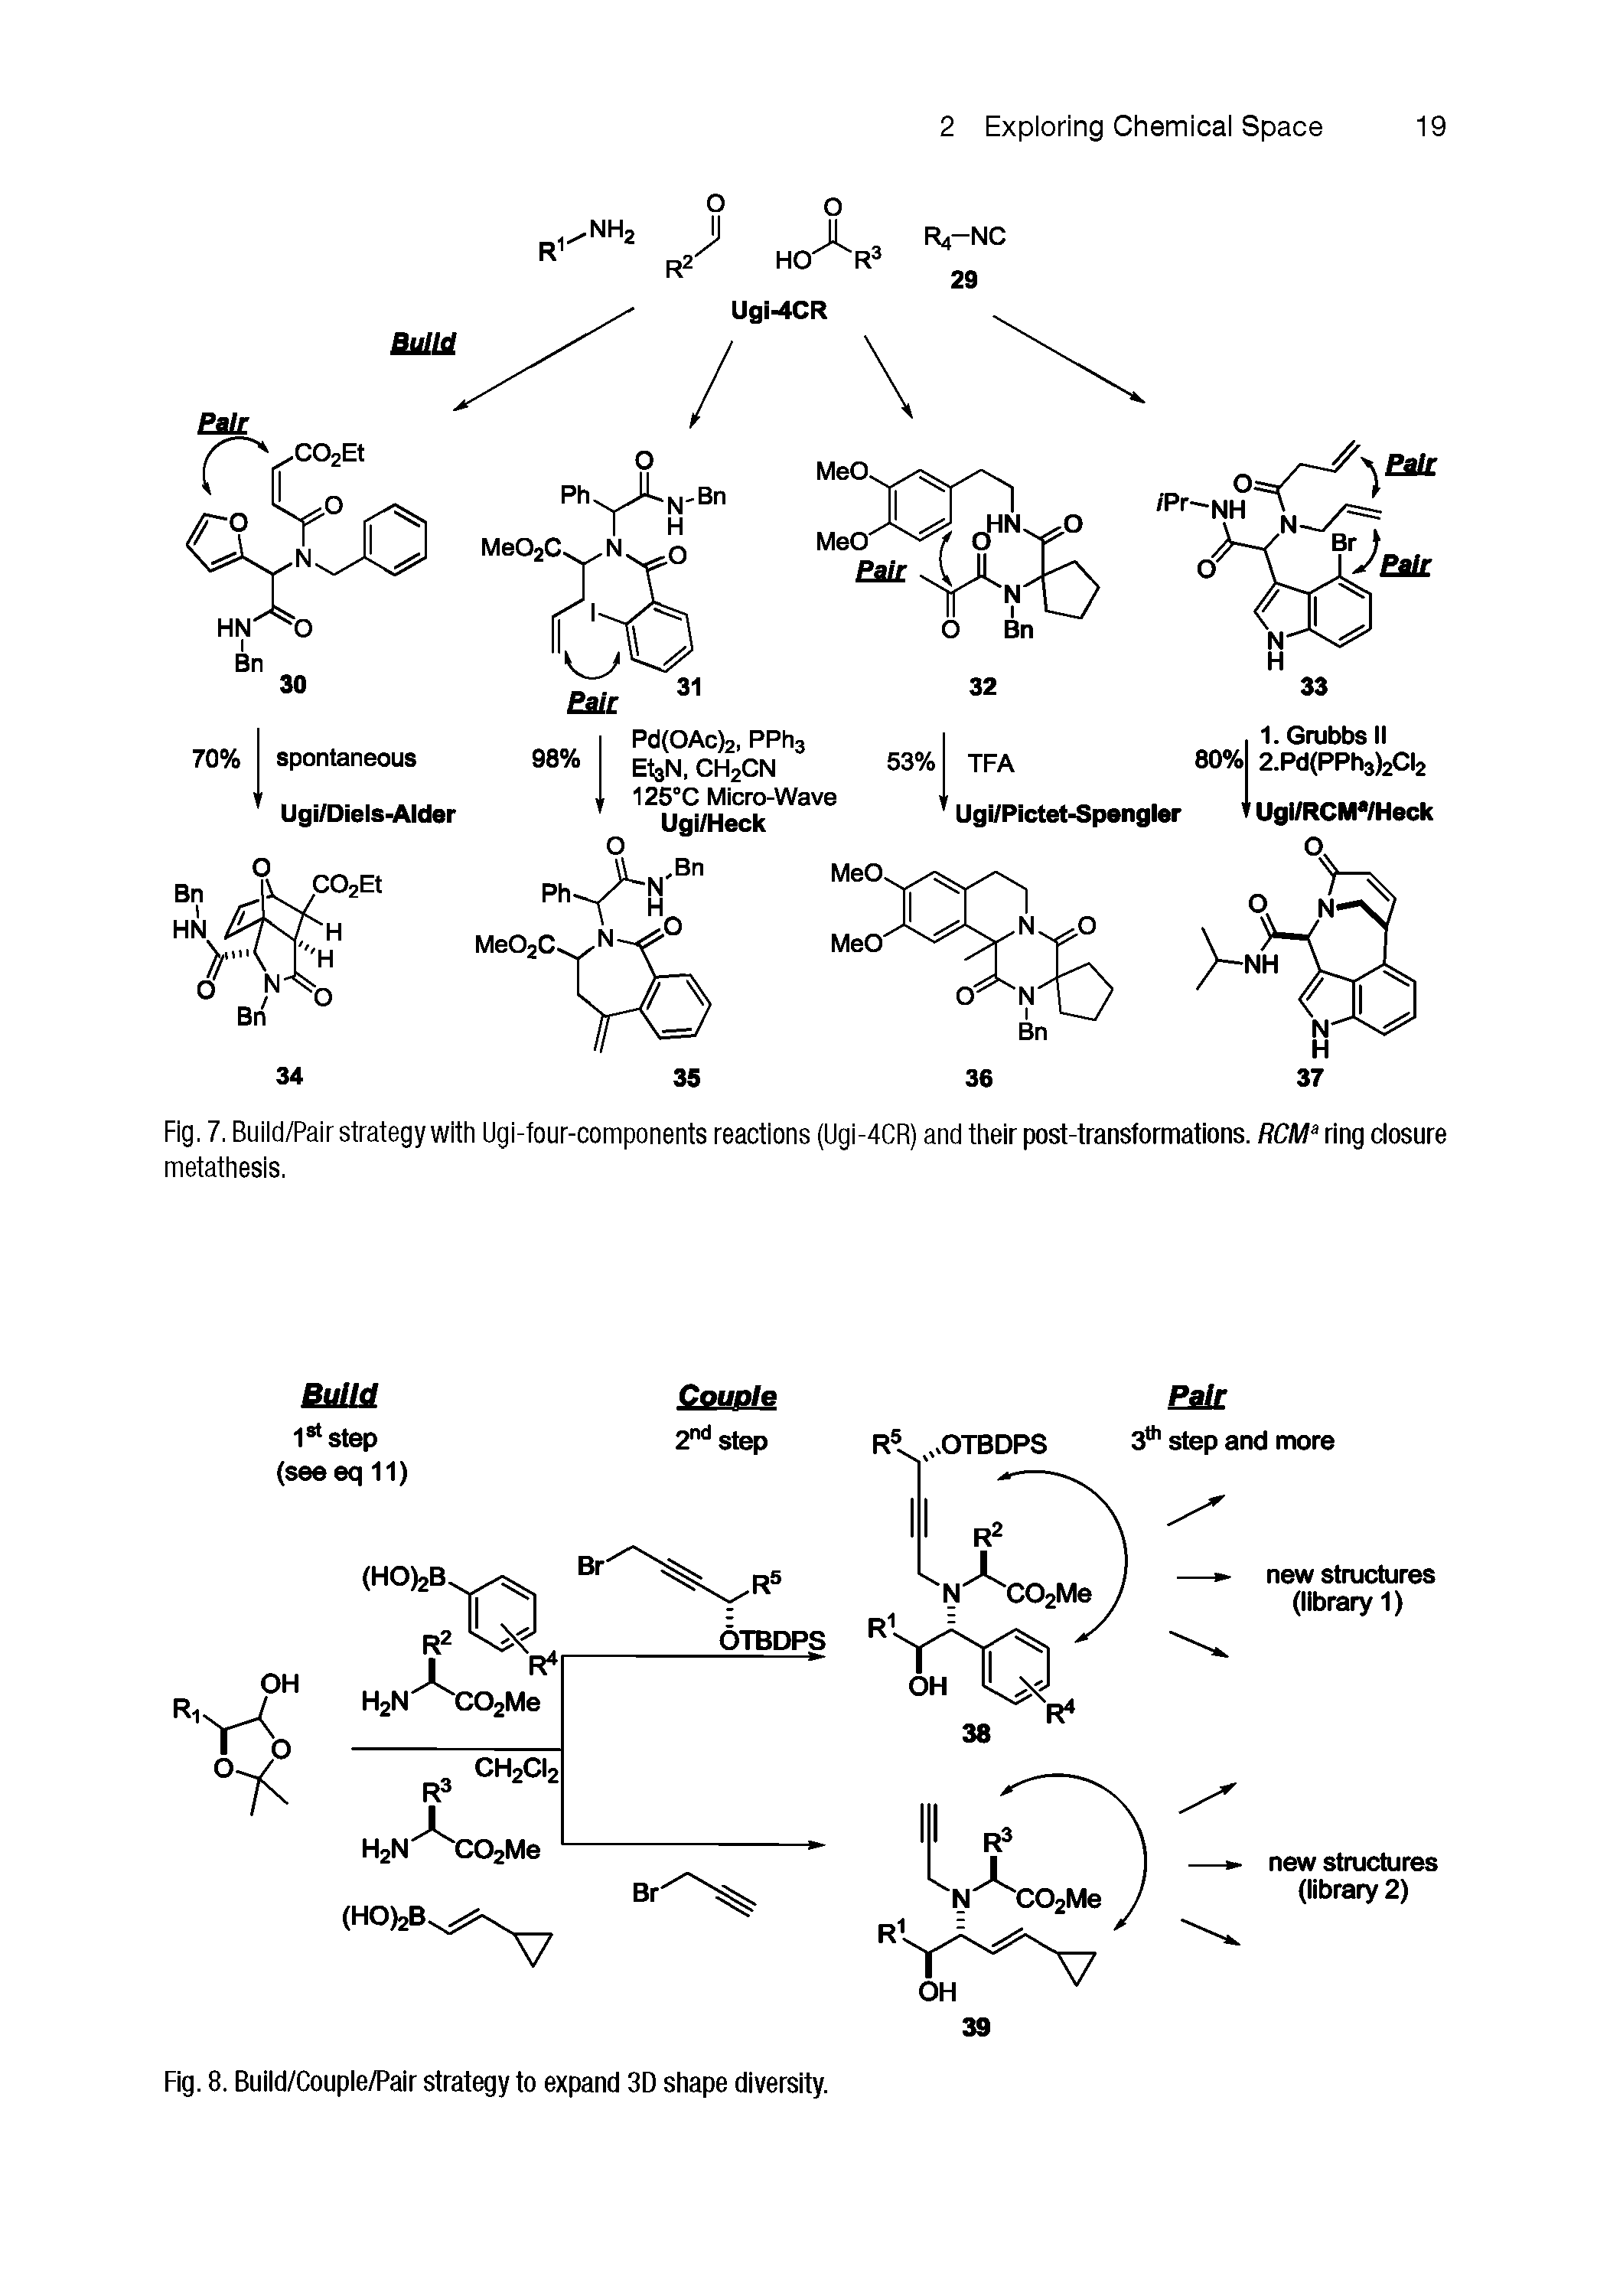 Fig. 7, Build/Pair strategy with Ugi-four-components reactions (Ugi-4CR) and their post-transformations. RCM ring dosure metathesis.